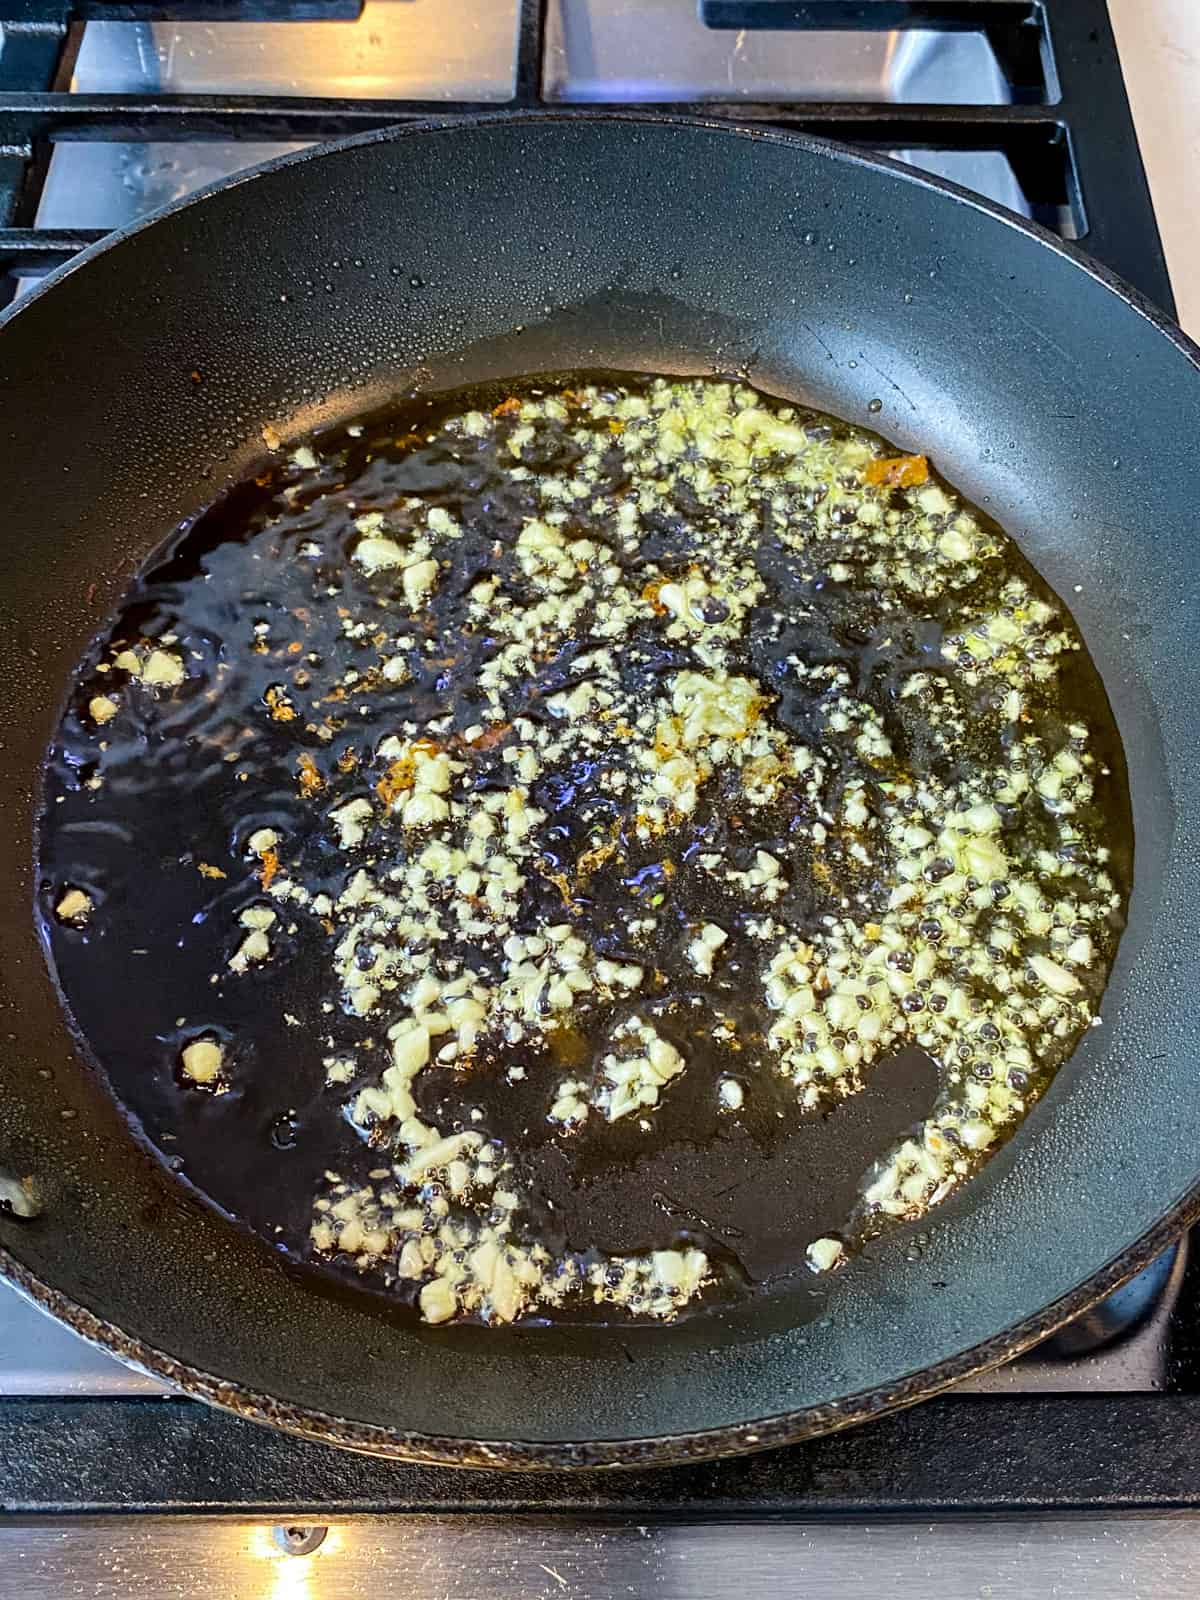 Saute chopped garlic in olive oil until lightly golden.